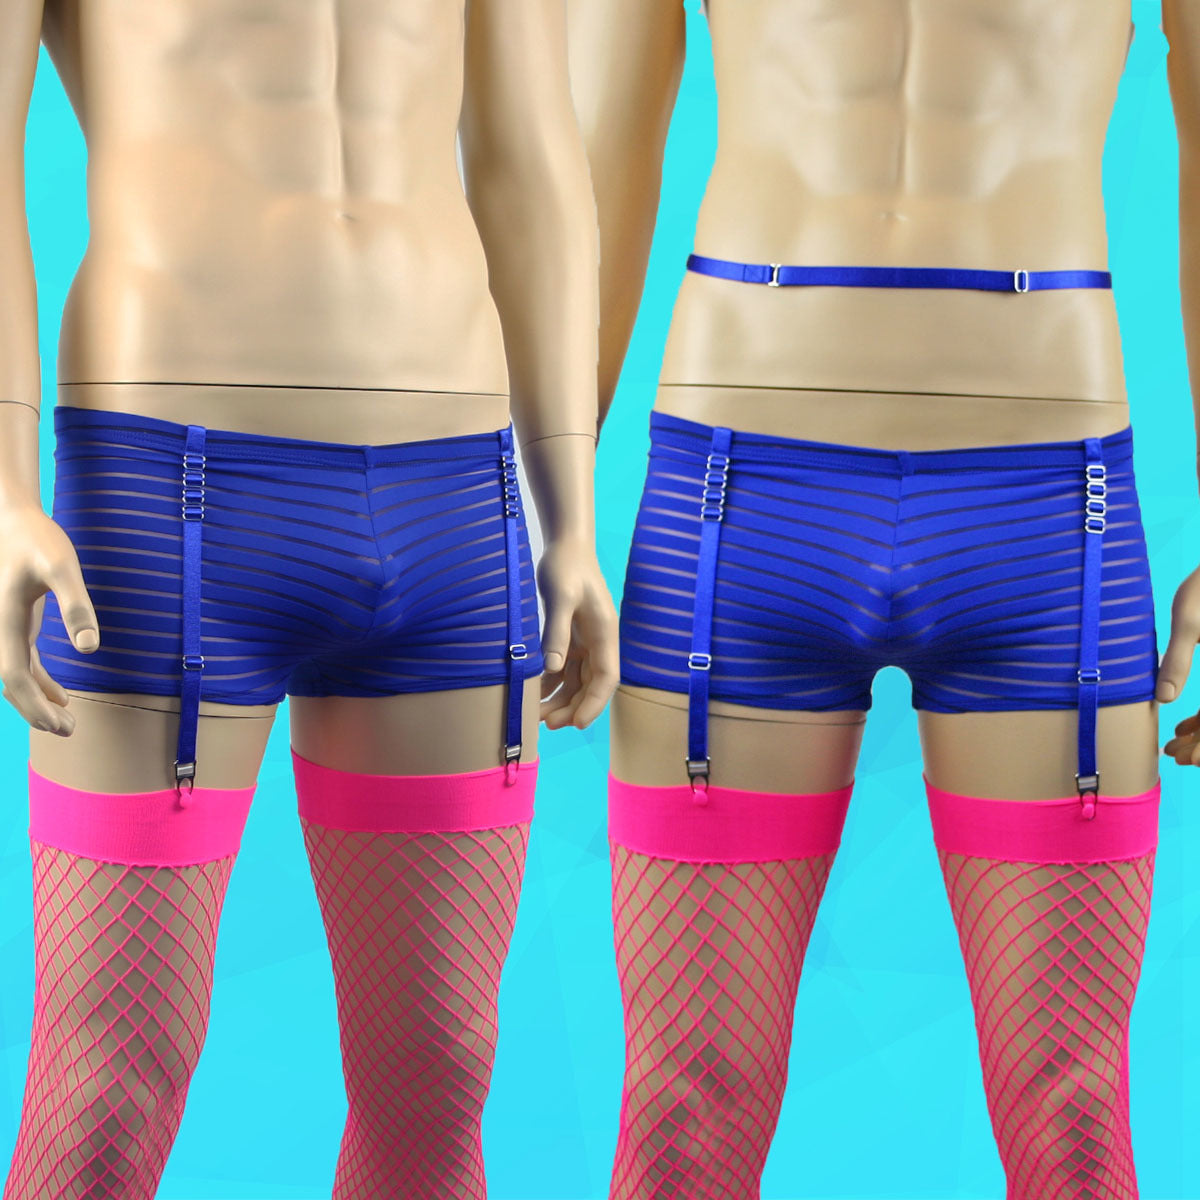 The Visual Treat of the Spangla Boxer Brief Shorts